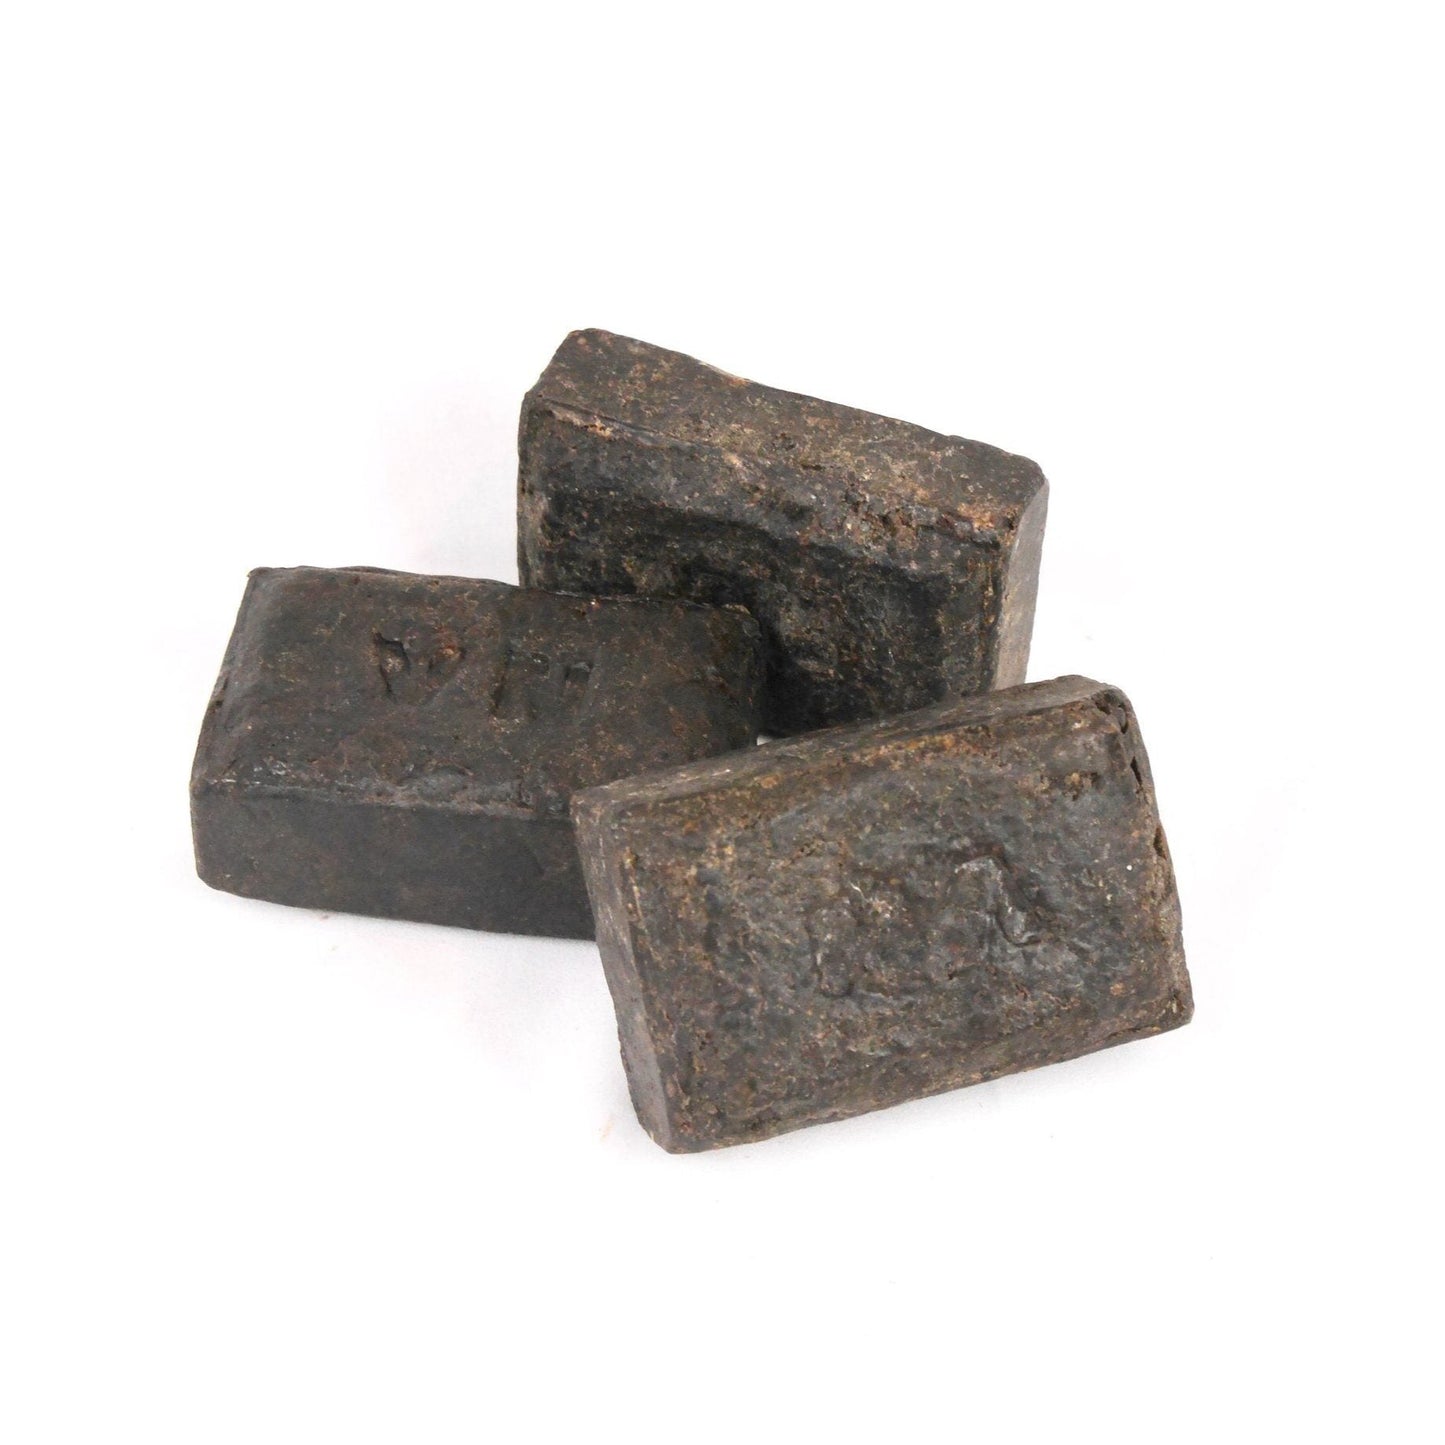 African Black Soap Bath and Body Mamaa Trade large bar 140gr Prettycleanshop